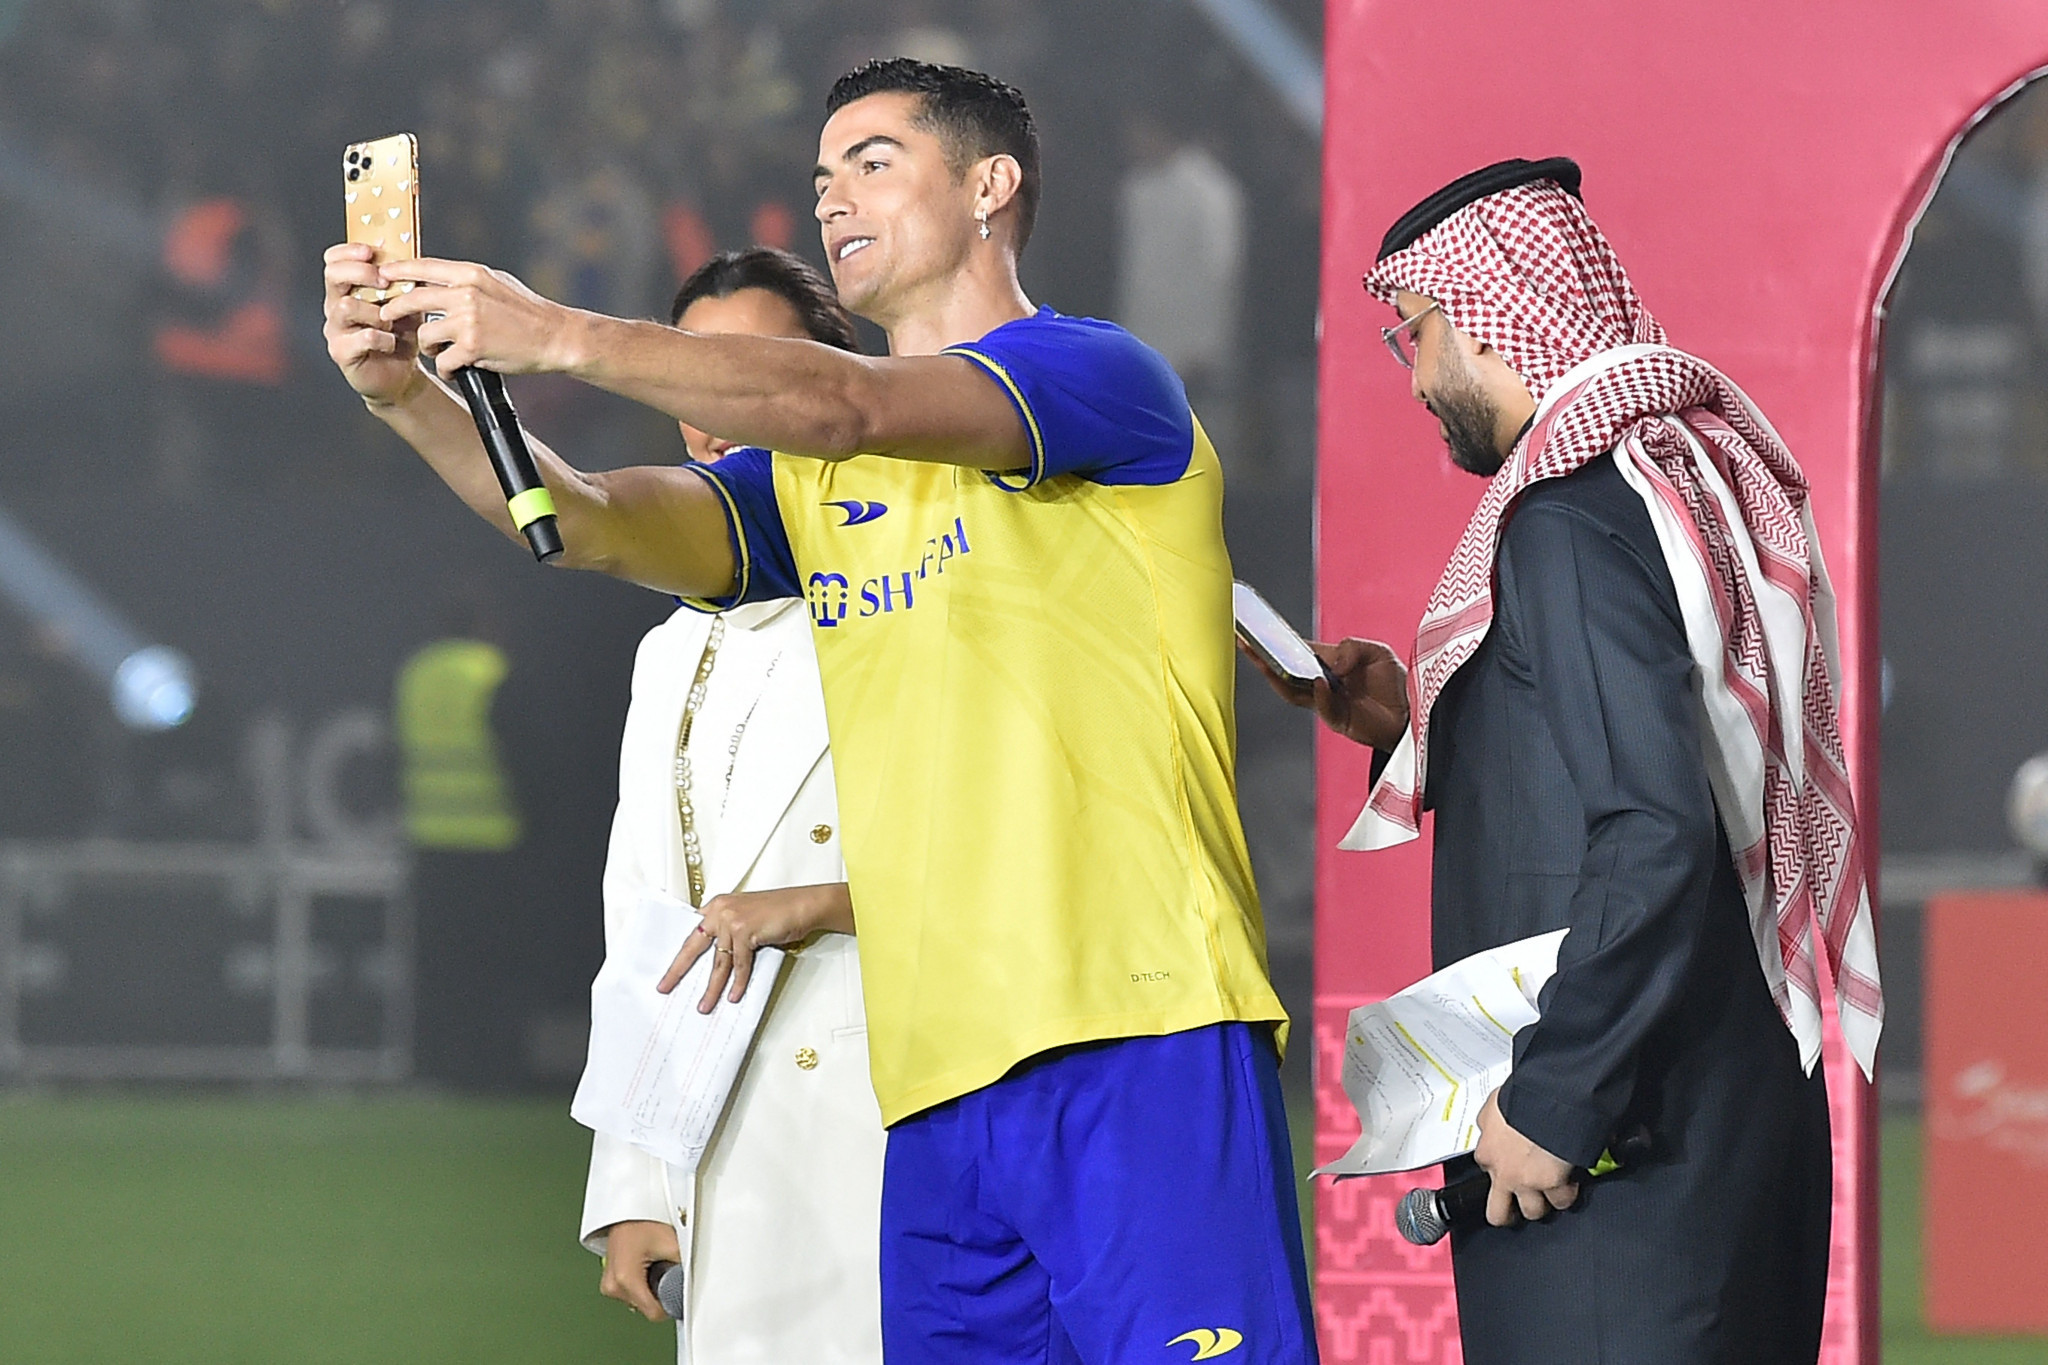 Cristiano Ronaldo is preparing to make his debut for his new club Al Nasr after his mega-money move to Saudi Arabia ©Getty Images